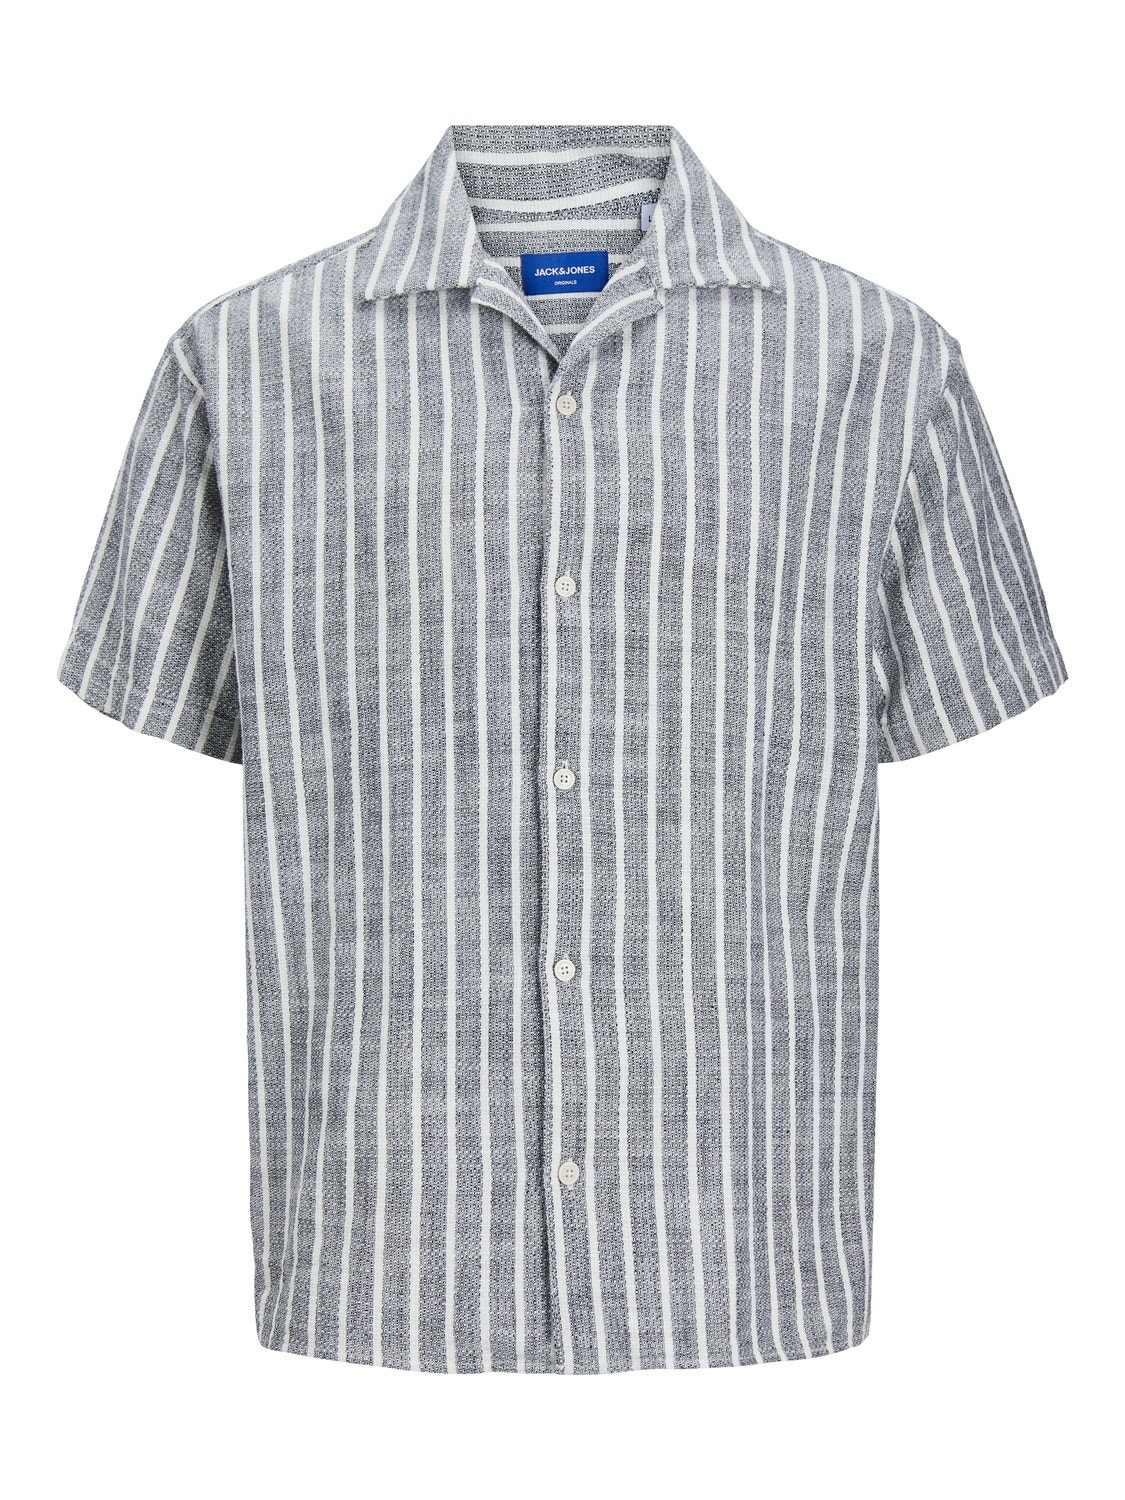 Jack & Jones Relaxed Fit Casual shirt -Sky Captain - 12233543